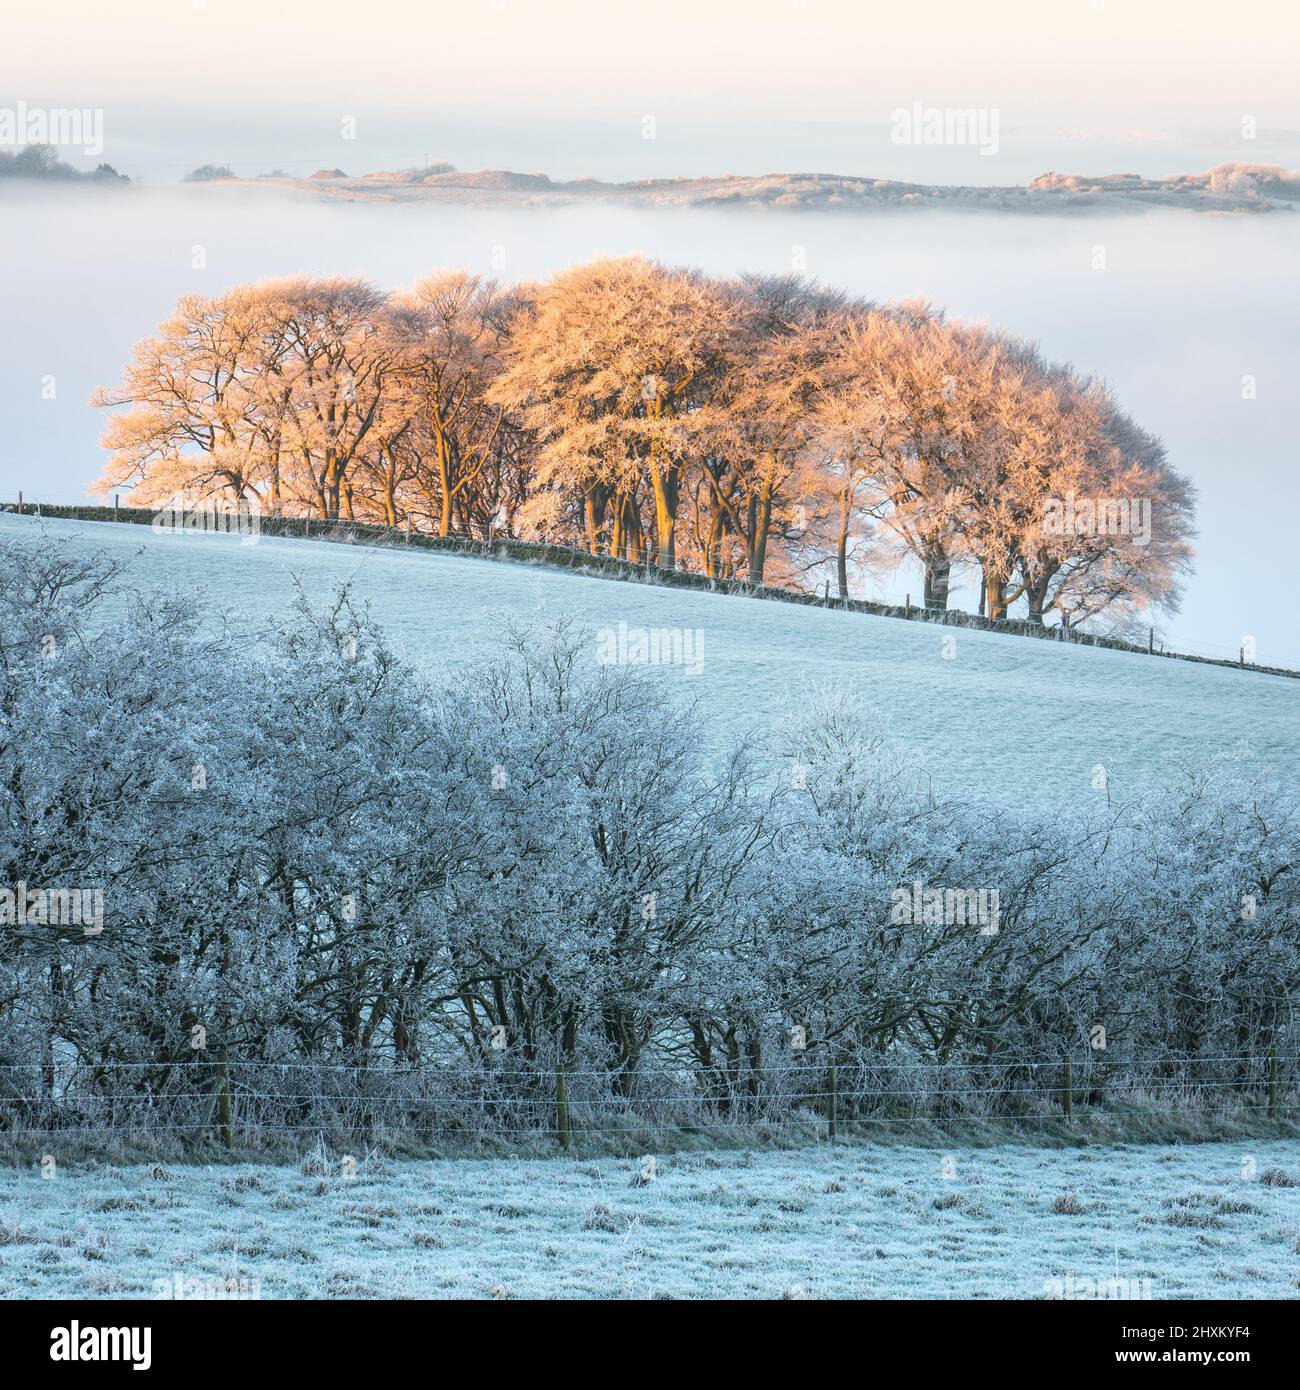 The 'Elephant Trees' above Guiseley glow orange in early morning light in contrast to the cool tones of the surrounding frosty landscape. Stock Photo